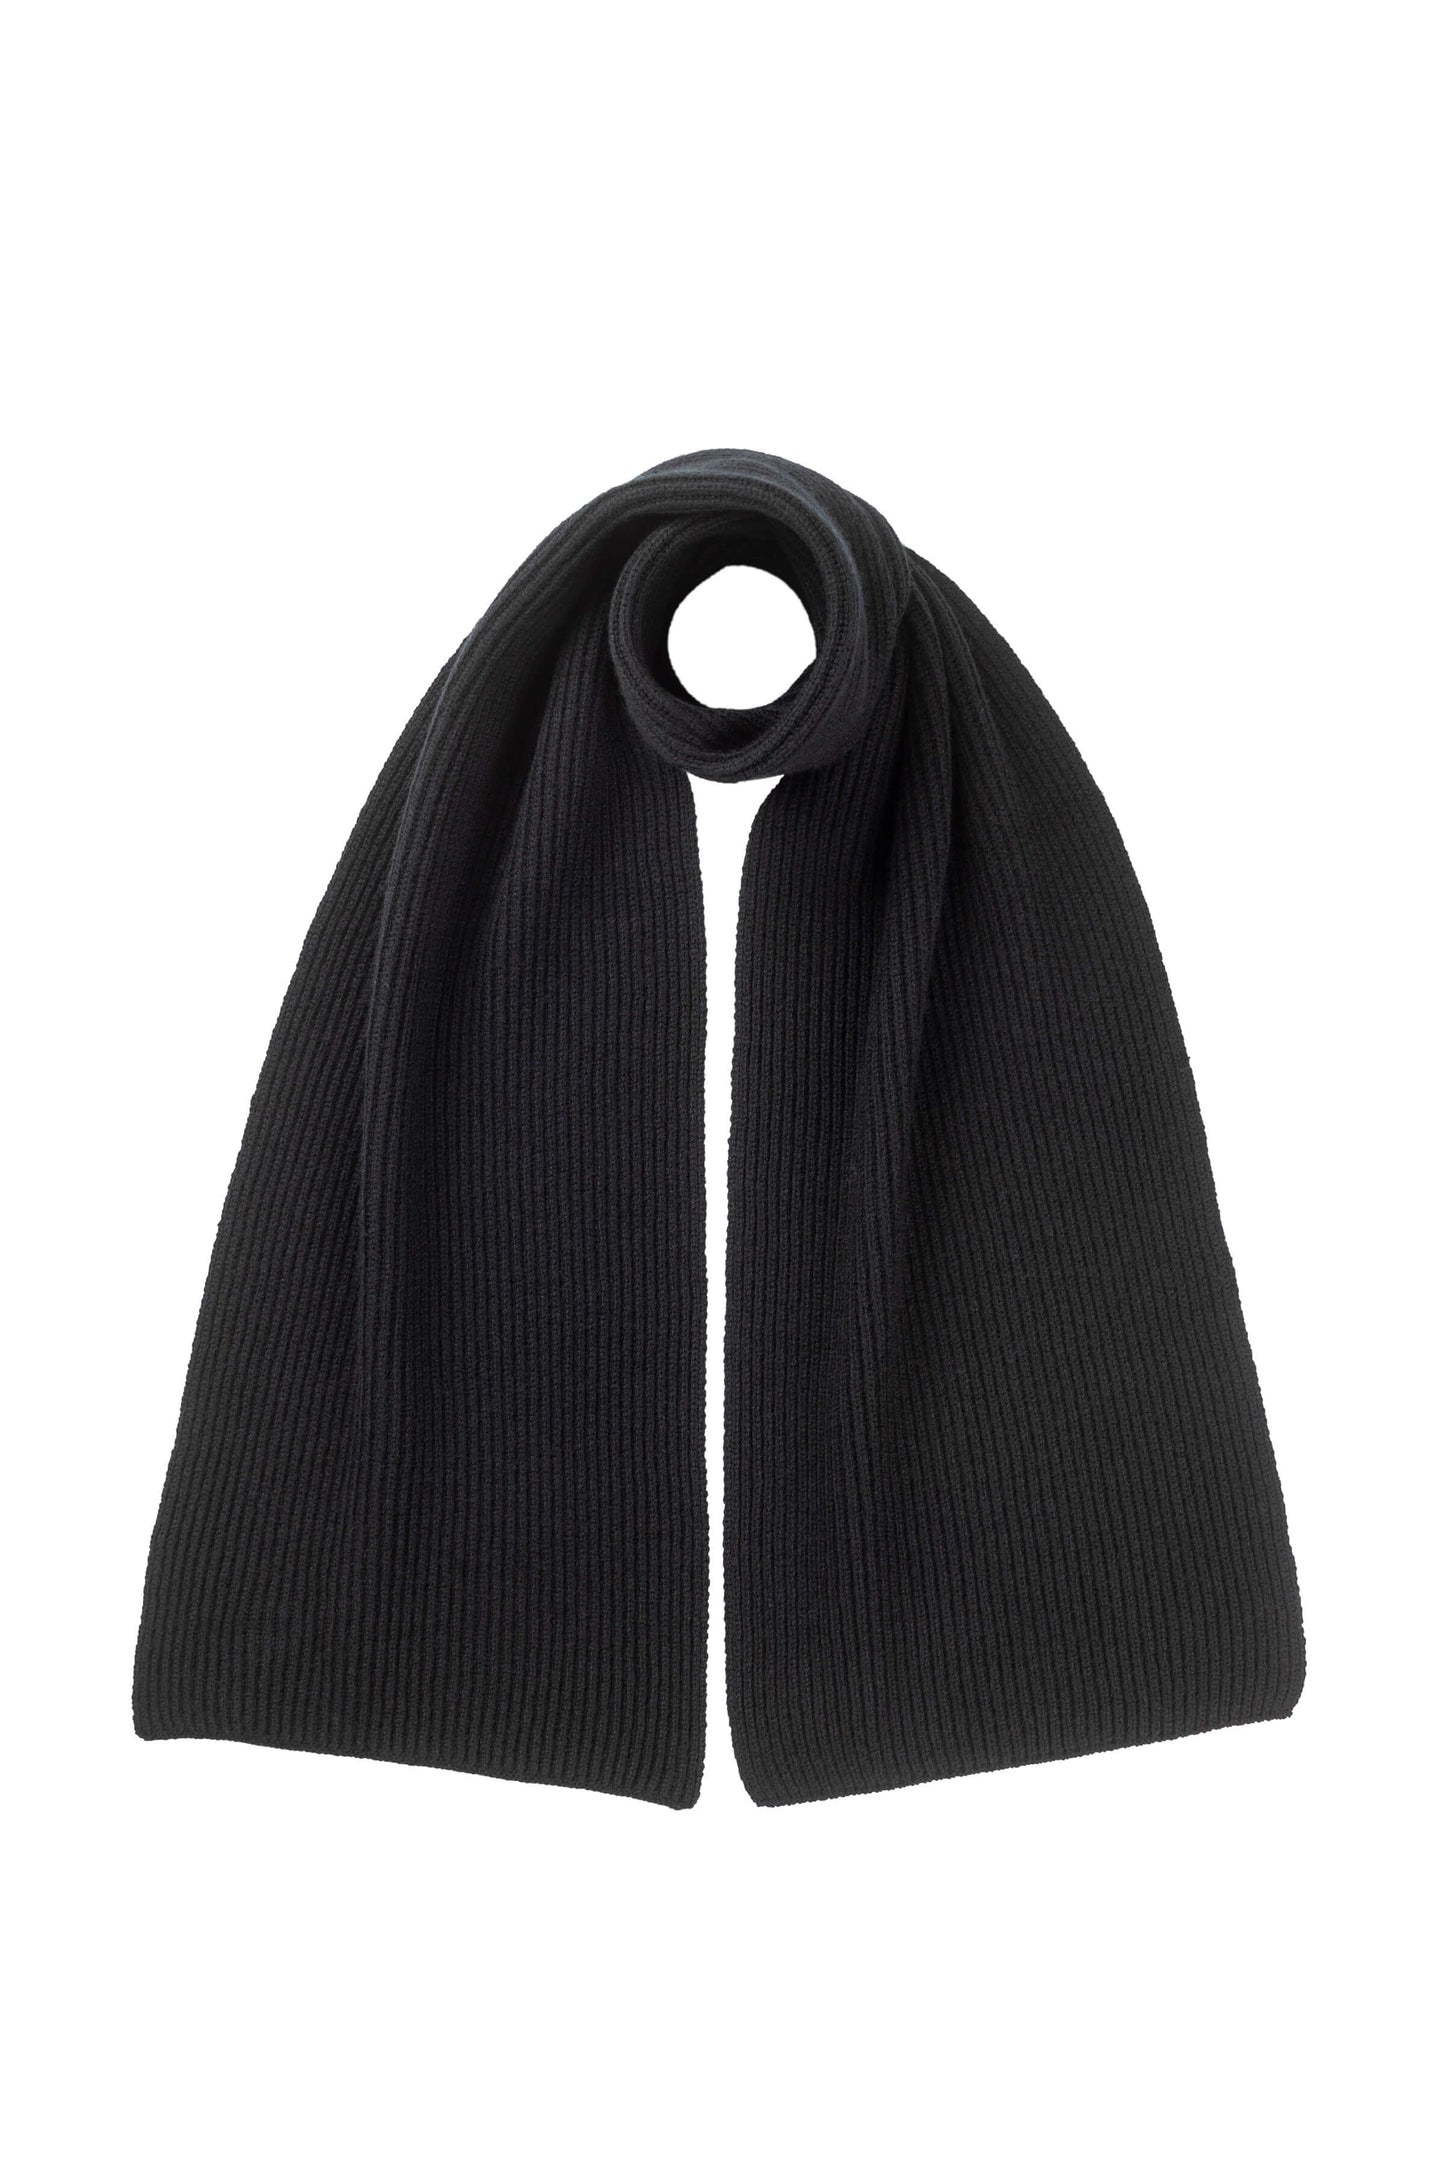 Johnstons of Elgin AW24 Knitted Accessory Black Ribbed Cashmere Scarf HAA01684SA0900N/A